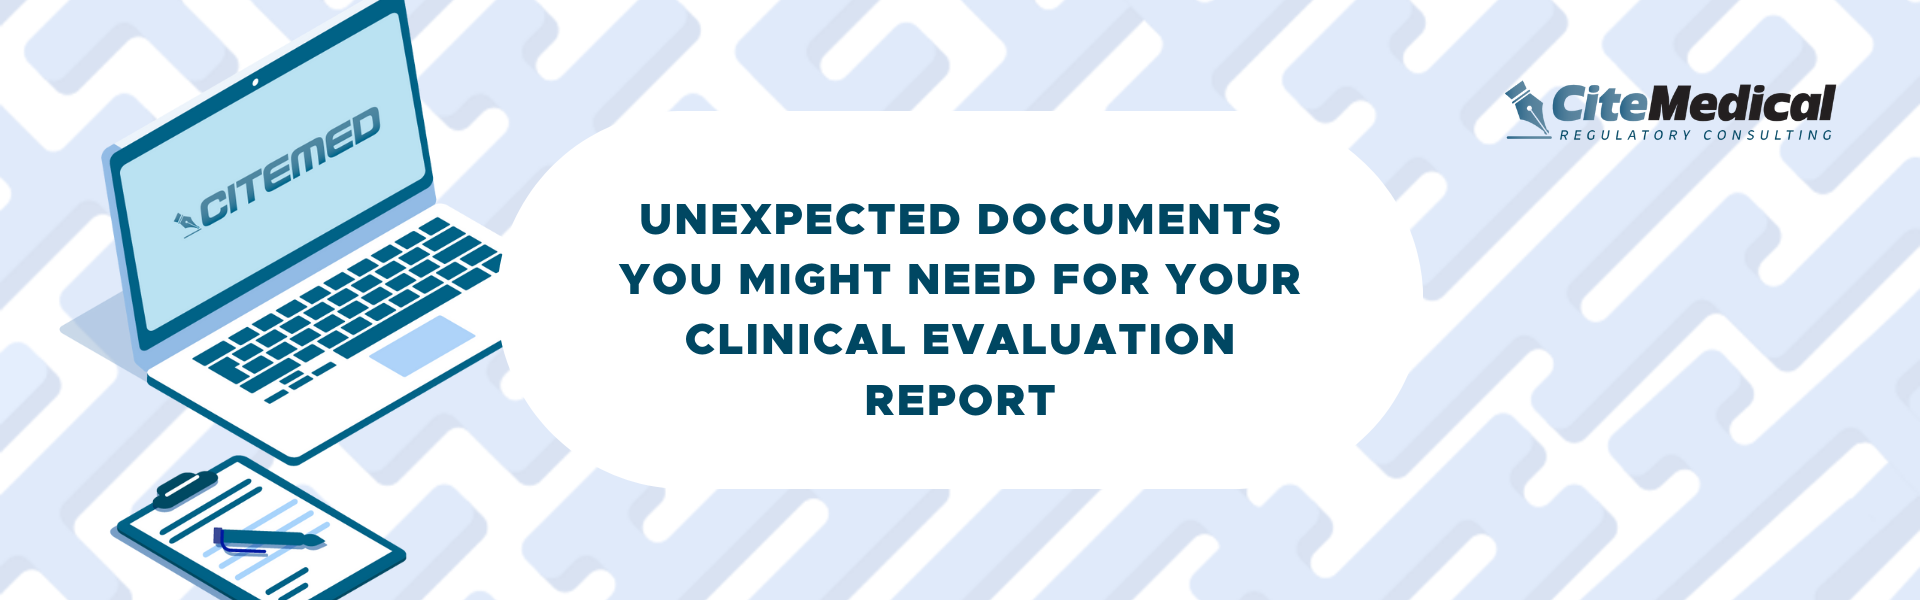 Clinical Evaluation Report